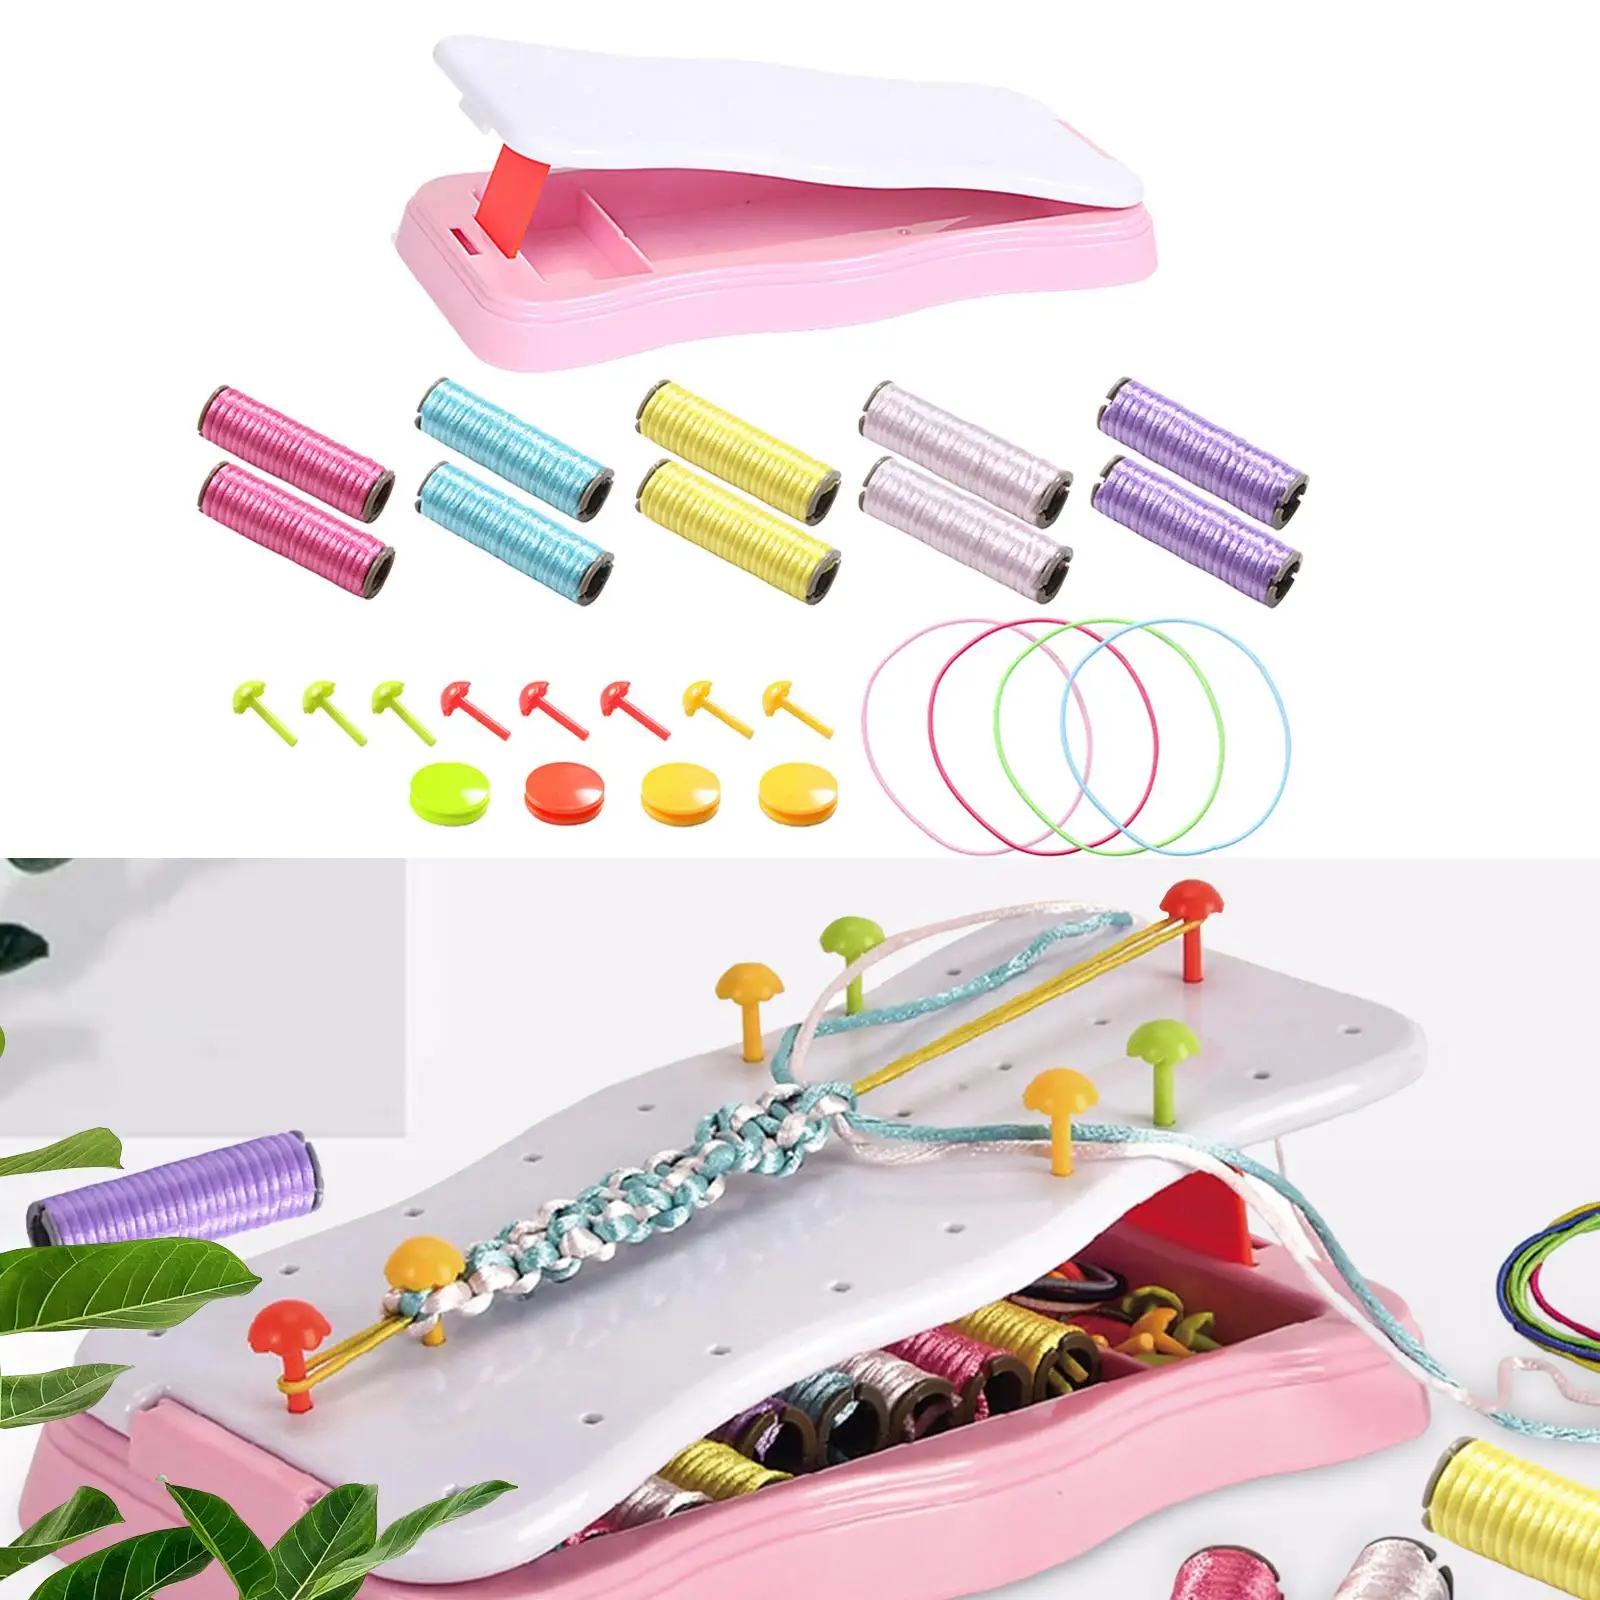 DIY Bracelet Making Set Jewellery Crafts Colorful Toys Handmade Bracelet String for Party Supplies Birthday Gifts Holiday